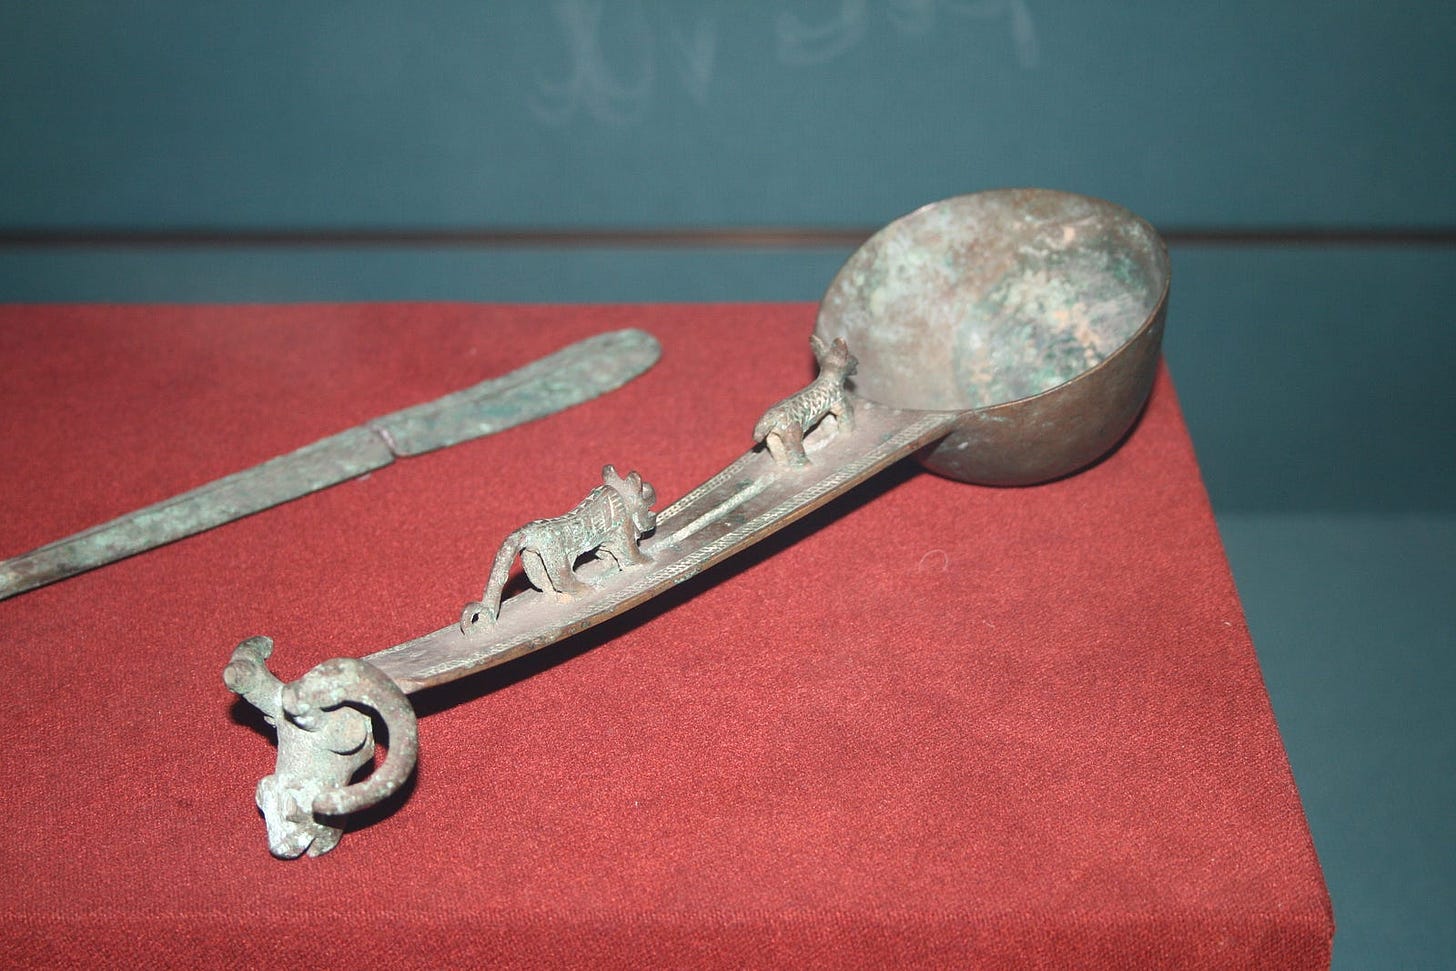 Spoon from China with animal figures from the 2nd millennium BC